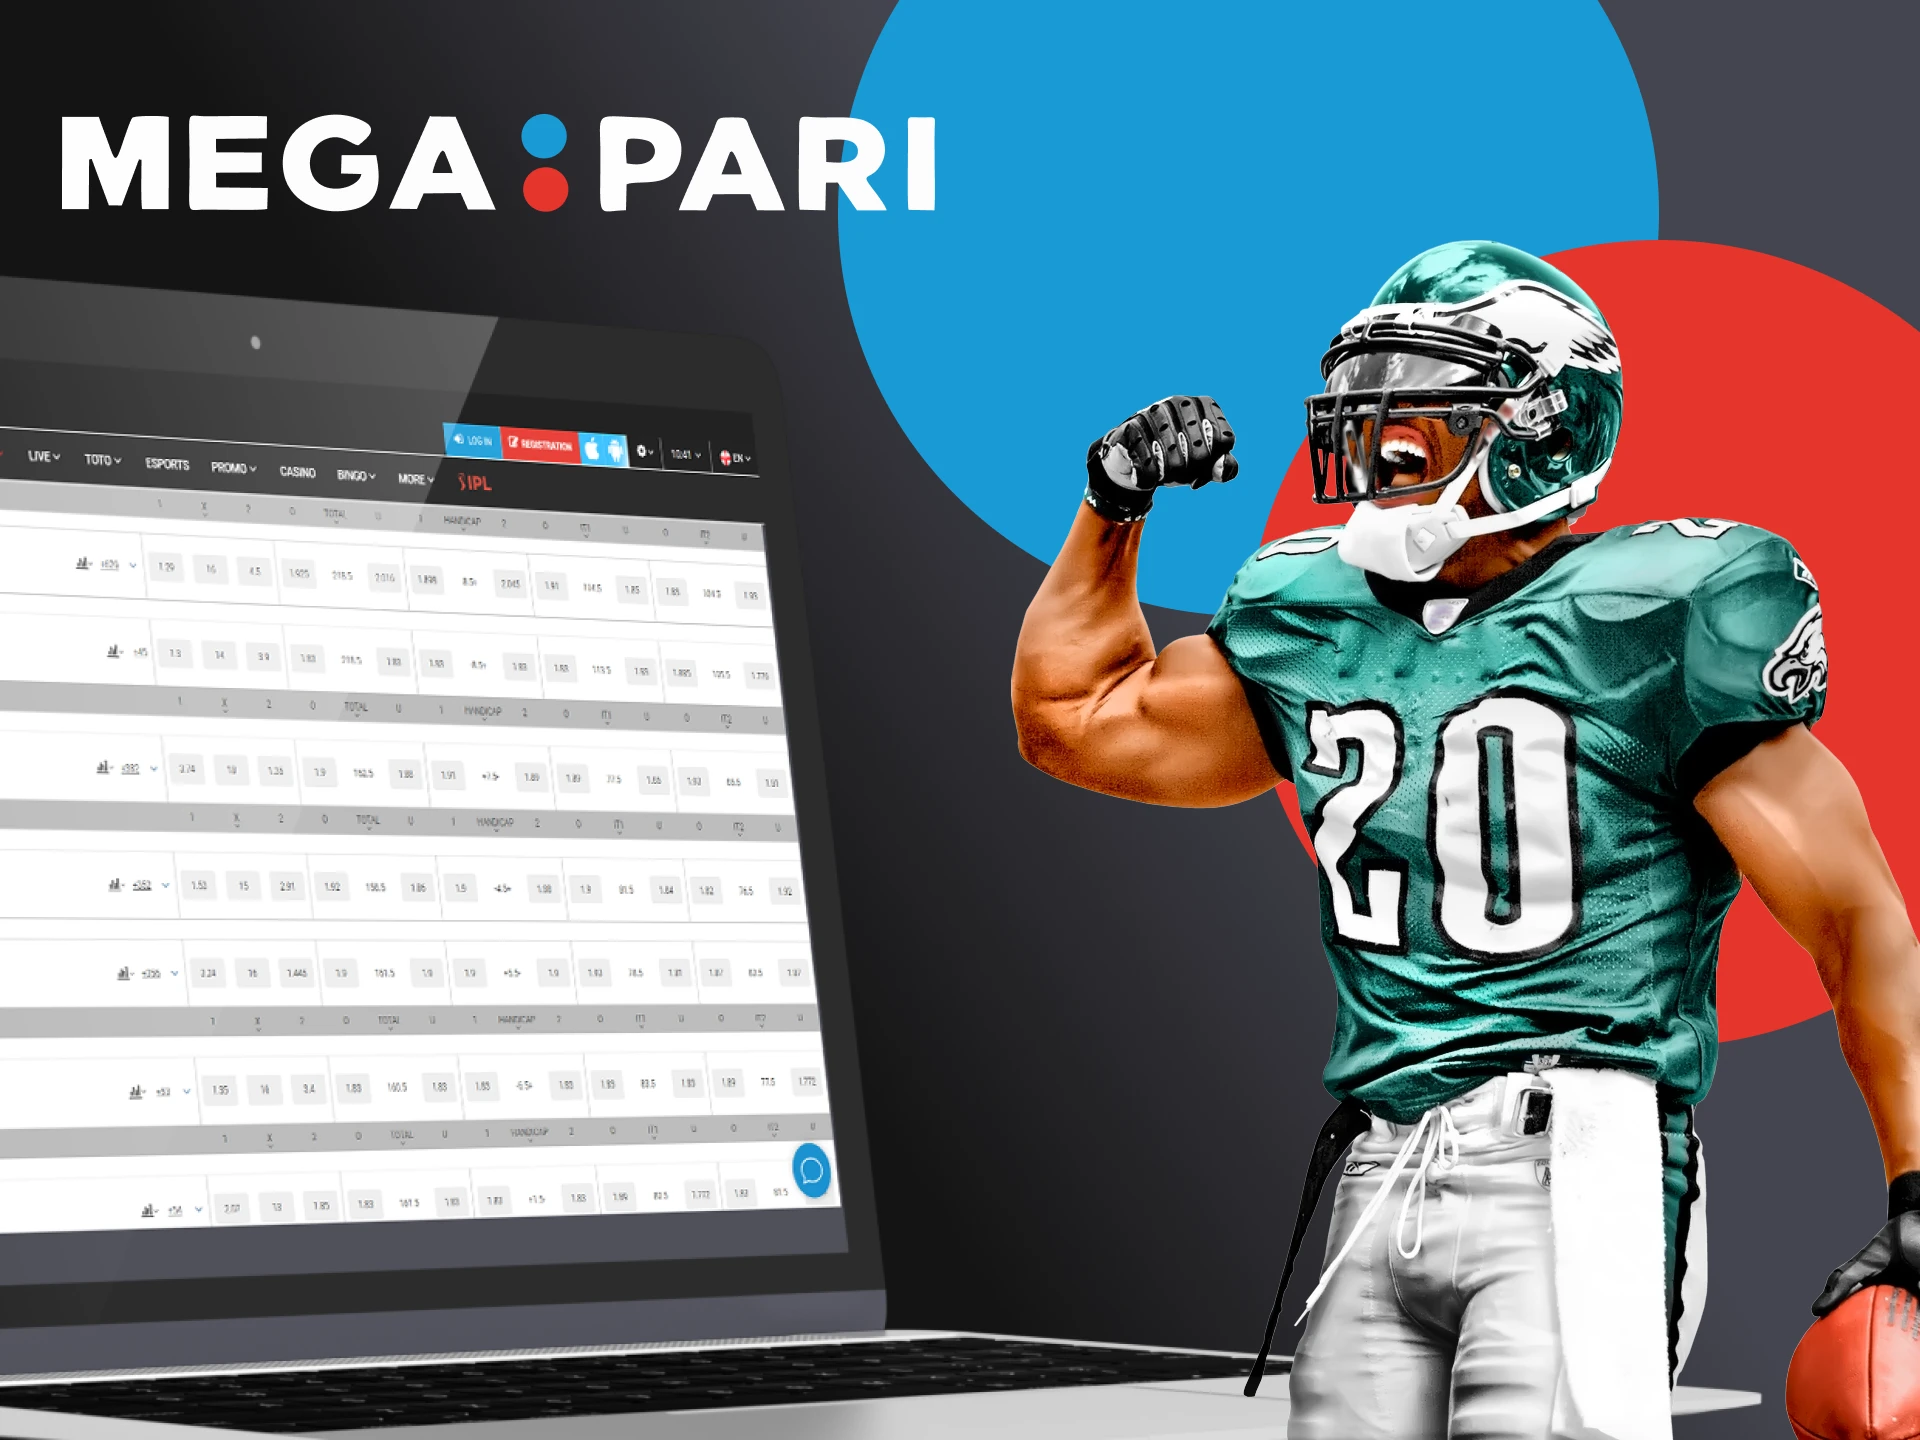 Go to the virtual sports section for betting on Megapari.